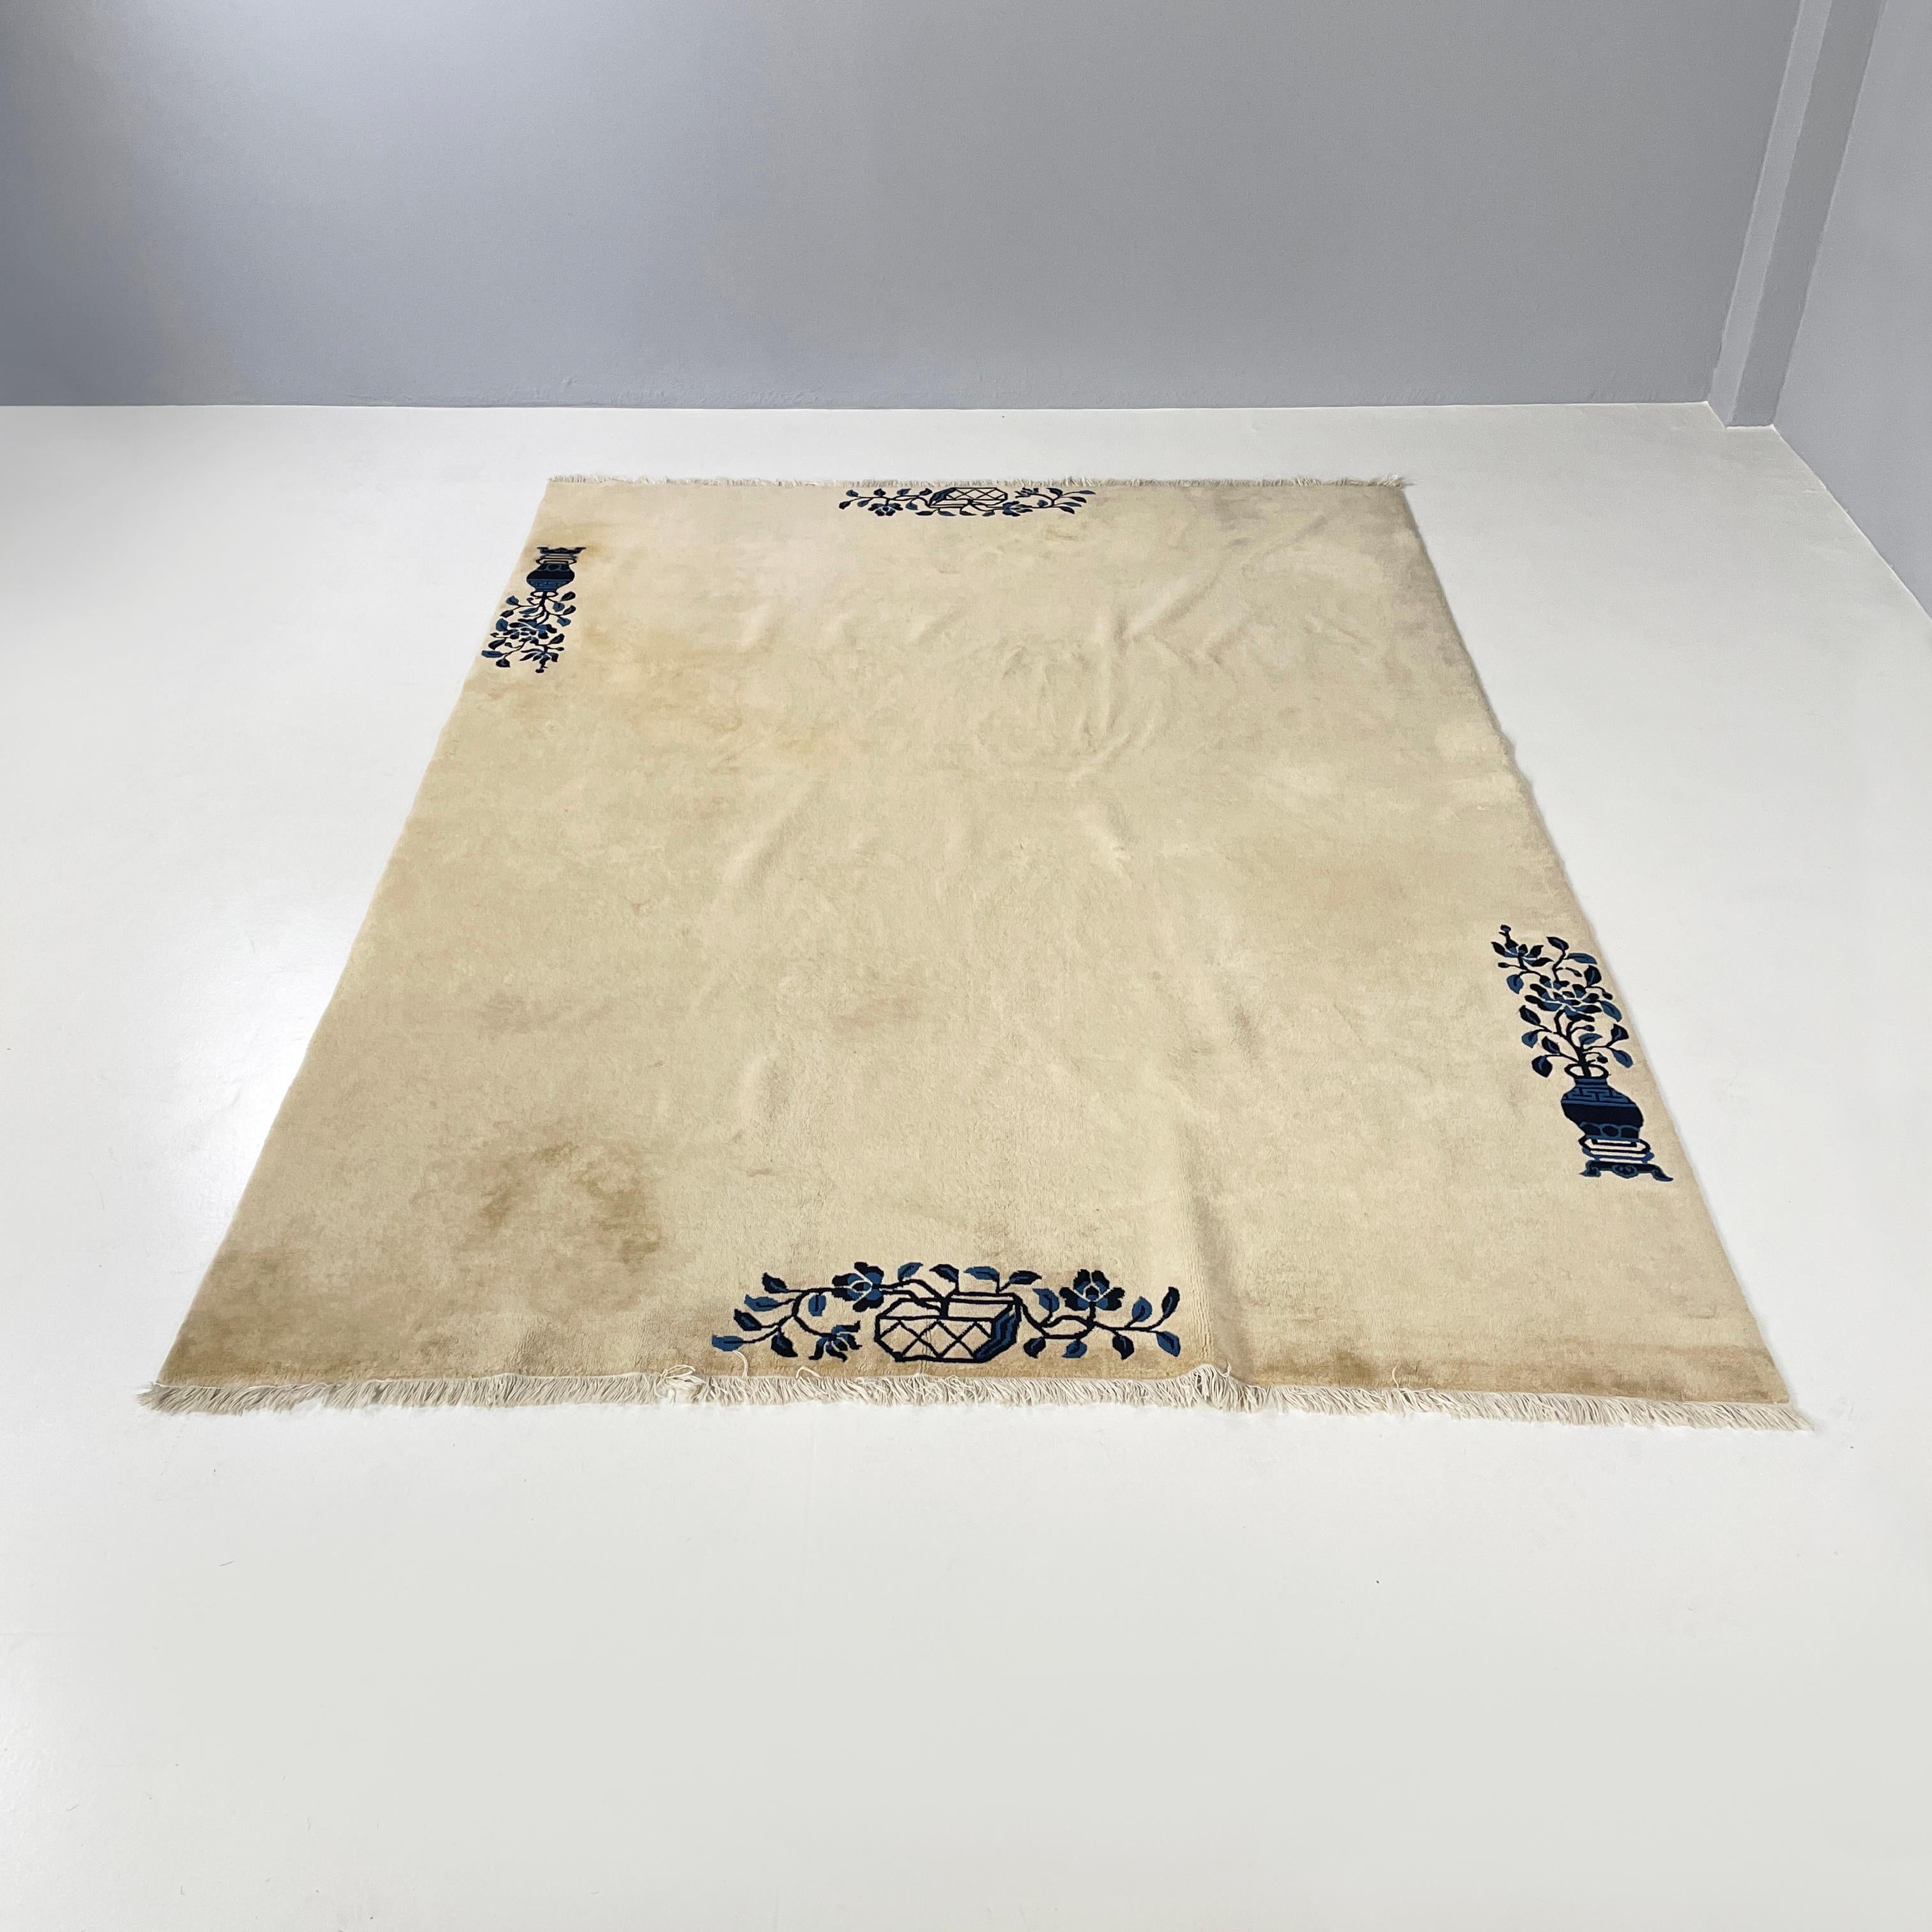 Chinese Beige carpet with black and blue floral decoration, early 1900s
Rectangular carpet in shades of beige with black and blue decorations. The decorations on the profile depict two flower vases: one narrow and high while the other wide and low.